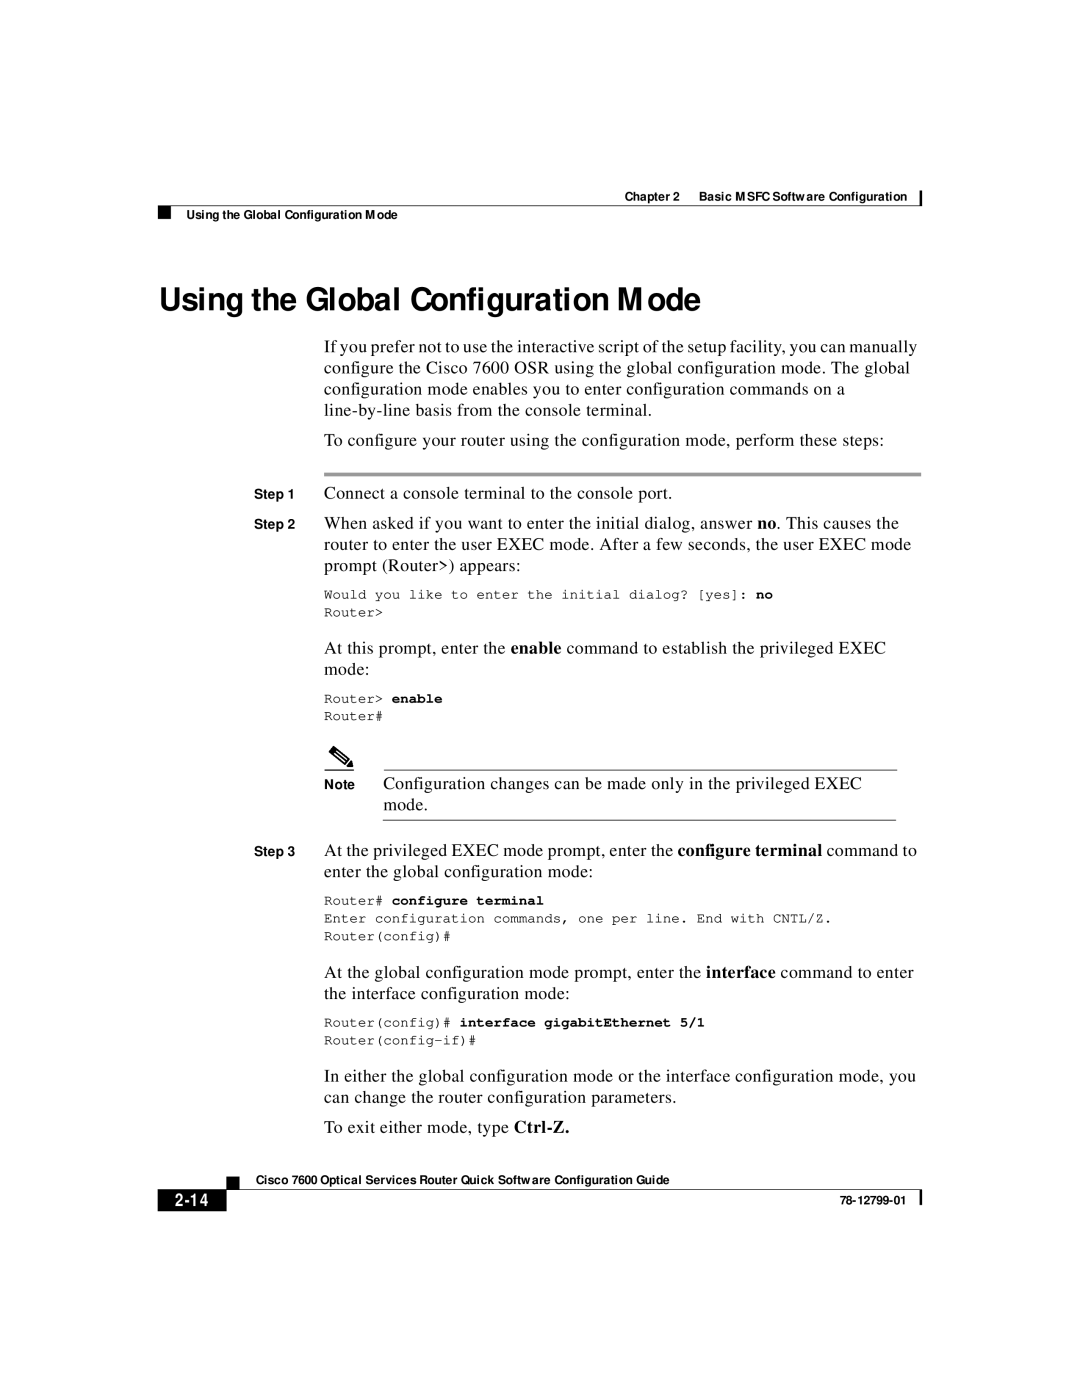 Cisco Systems 7600 manual Using the Global Configuration Mode, 2-14 